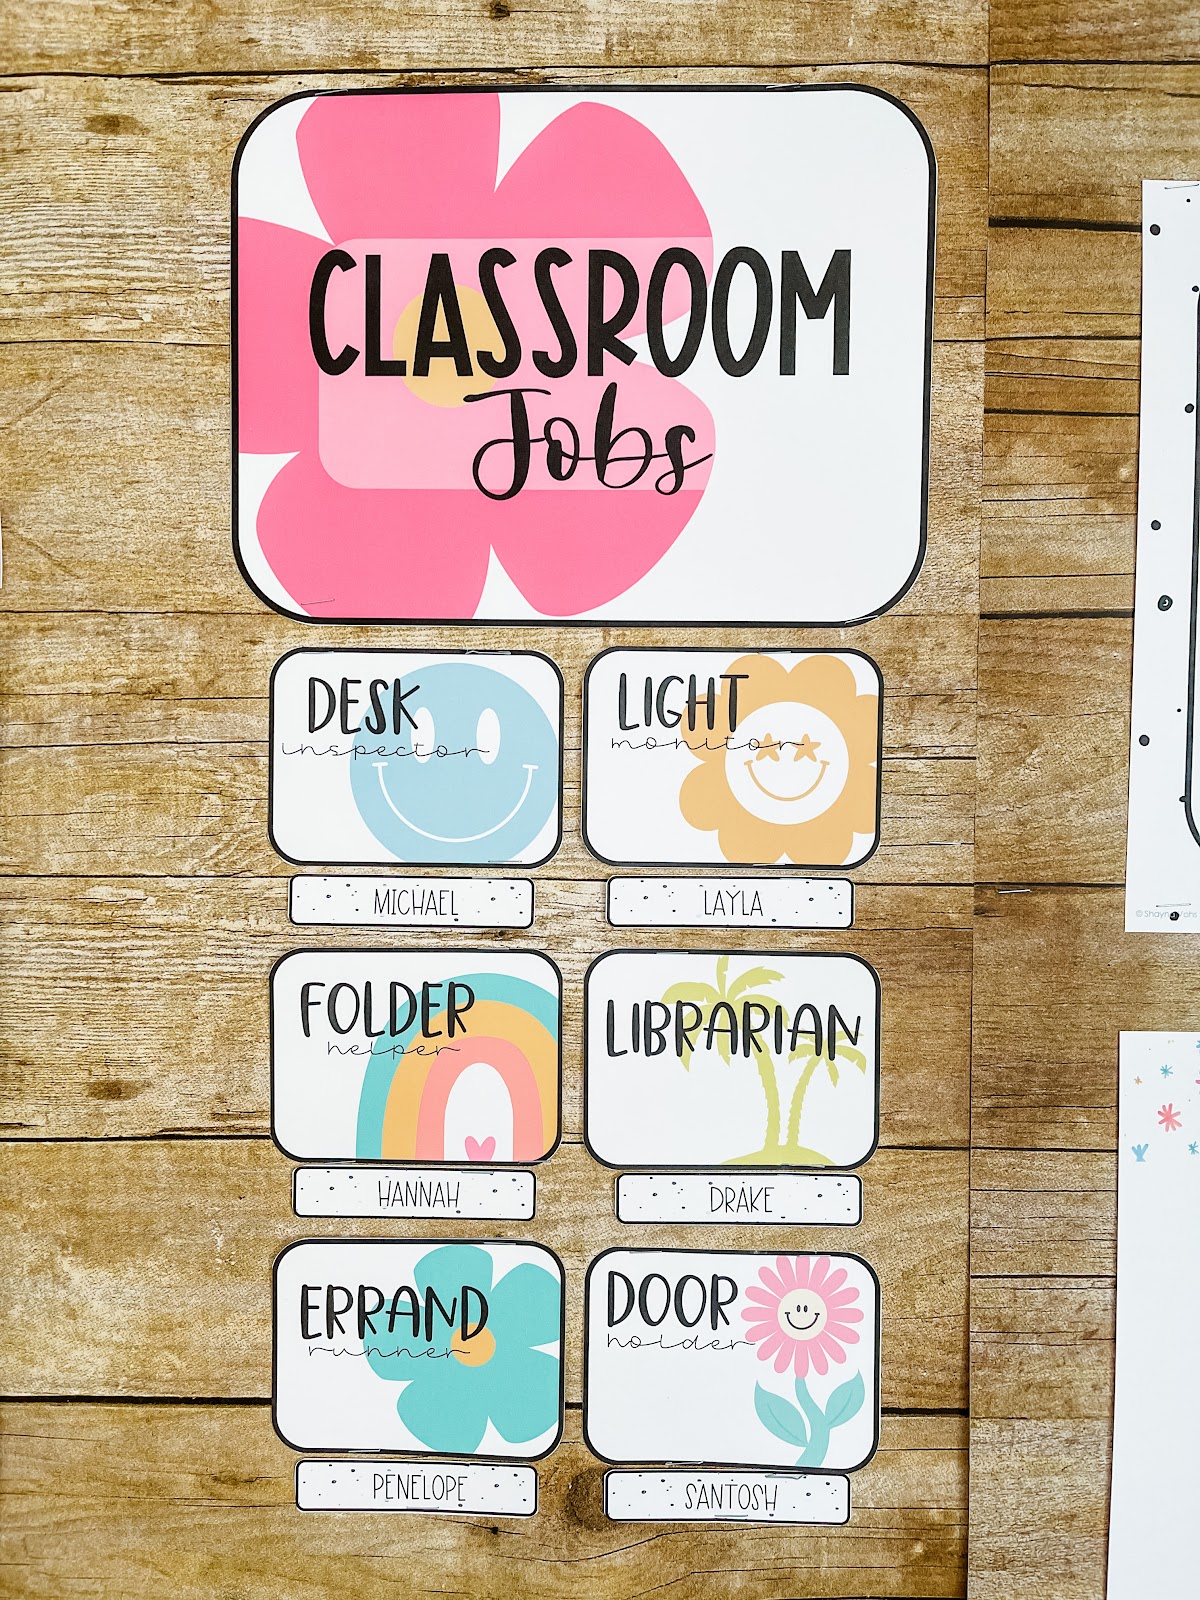 This image shows a classroom jobs display. There is a large card labeled "classroom jobs" with a flower in the background. Underneath that larger card are smaller cards with the names of different classroom jobs on them. For example, "Desk inspector" or "Door holder". Under each job card is a small rectangle with a student's name. The cards all have large images in their background to create a tropical, beach theme. 